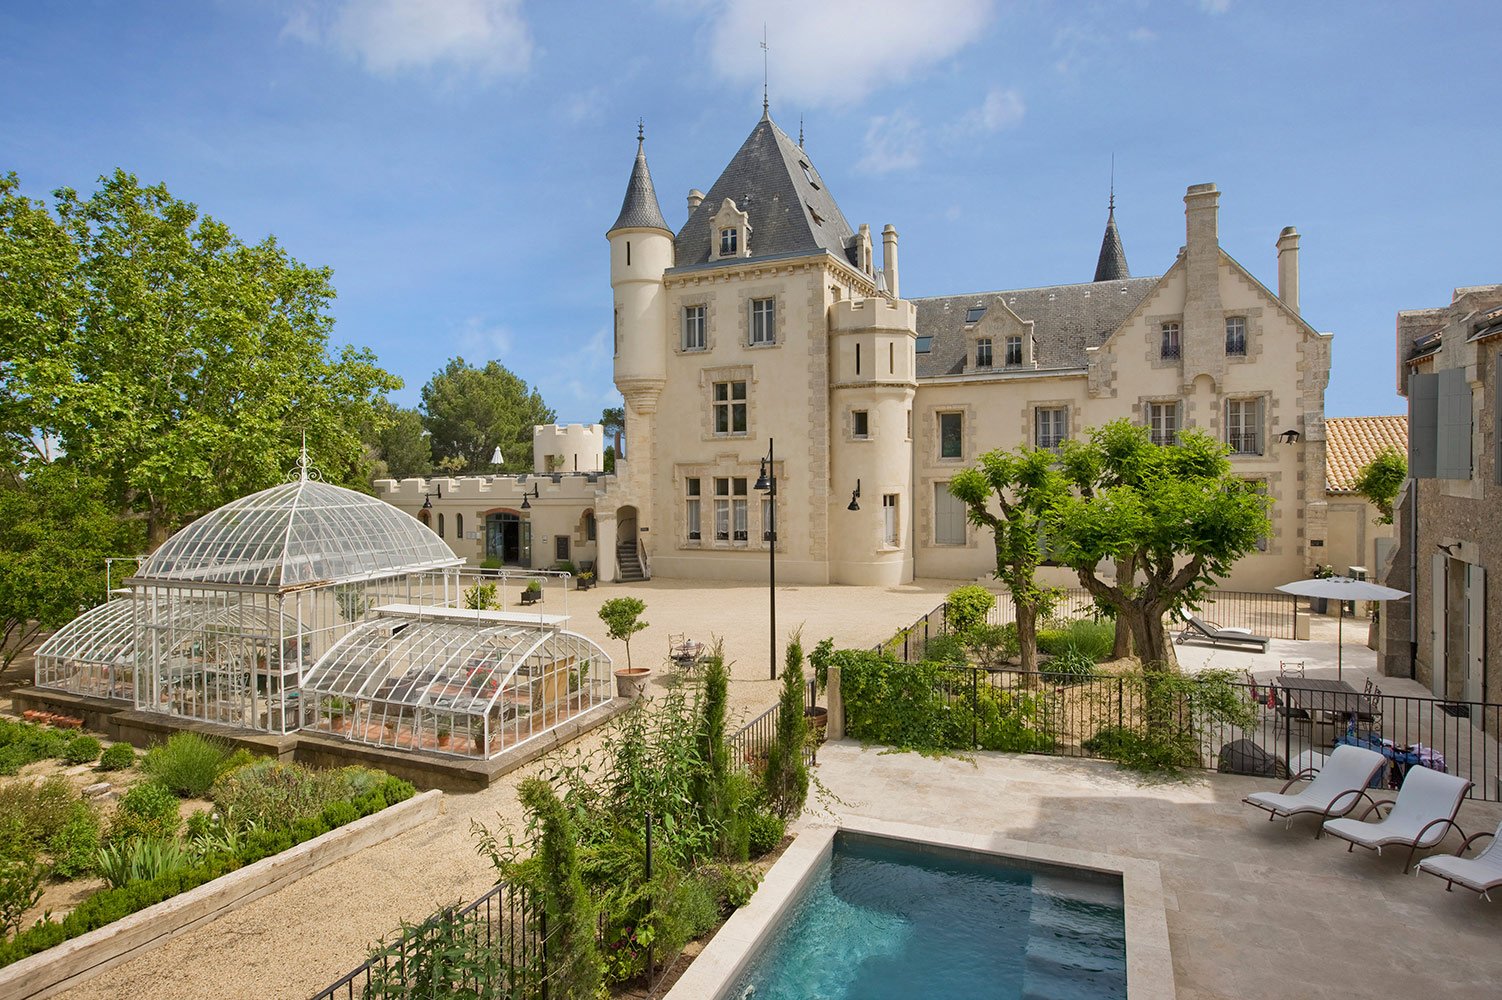 mercator-pr-for-chateau-les-carrasses-exterior-view.jpg